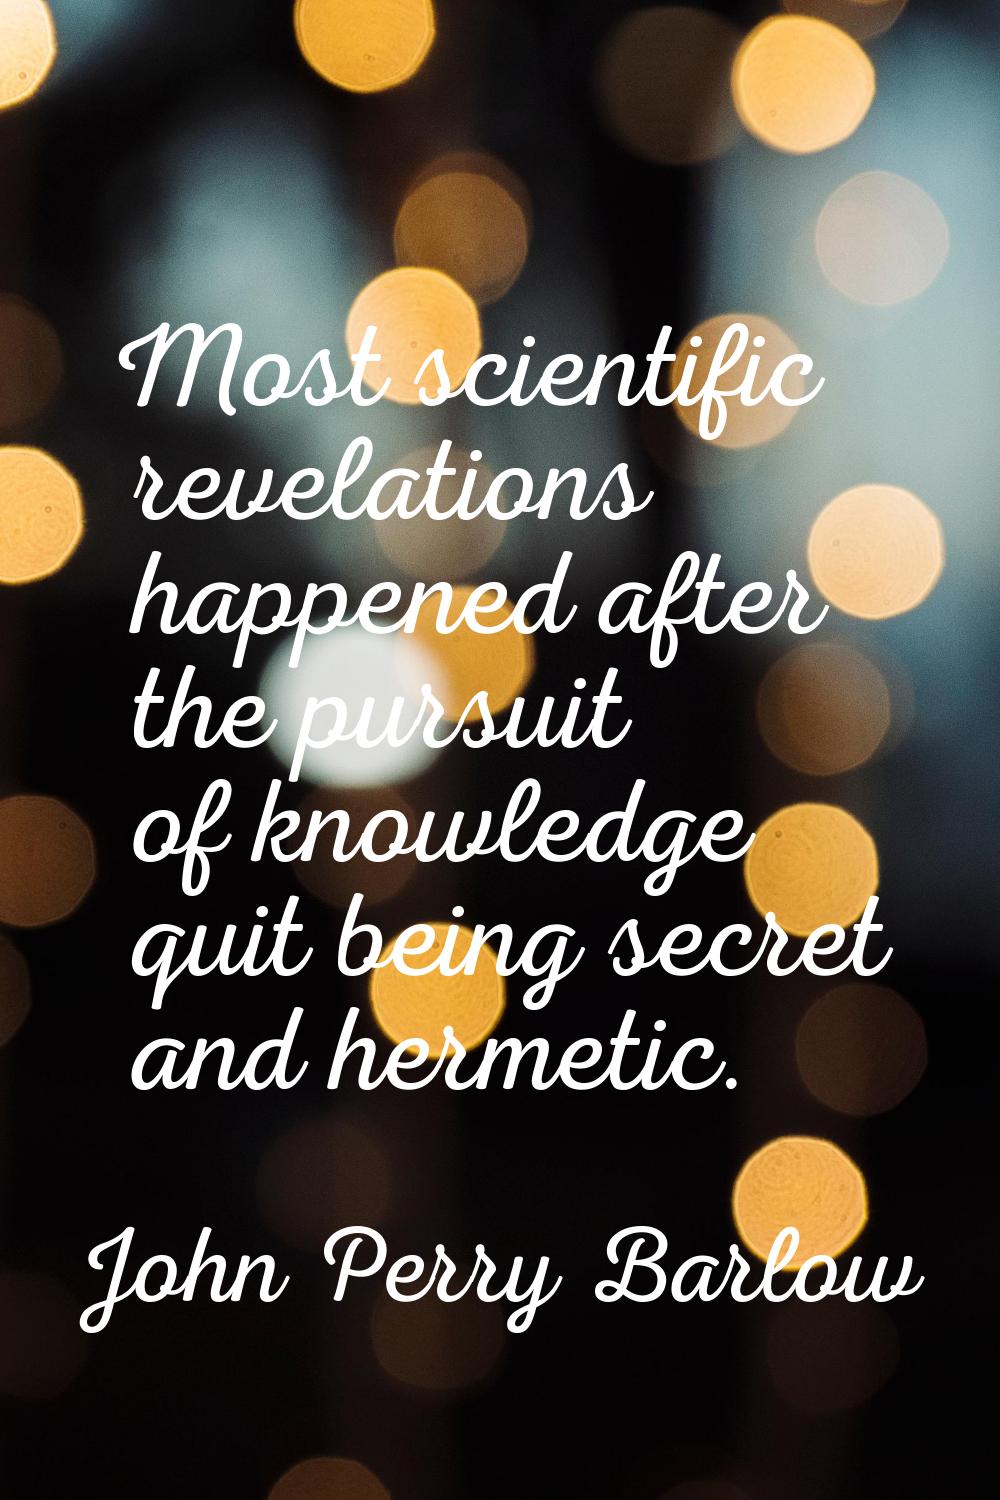 Most scientific revelations happened after the pursuit of knowledge quit being secret and hermetic.